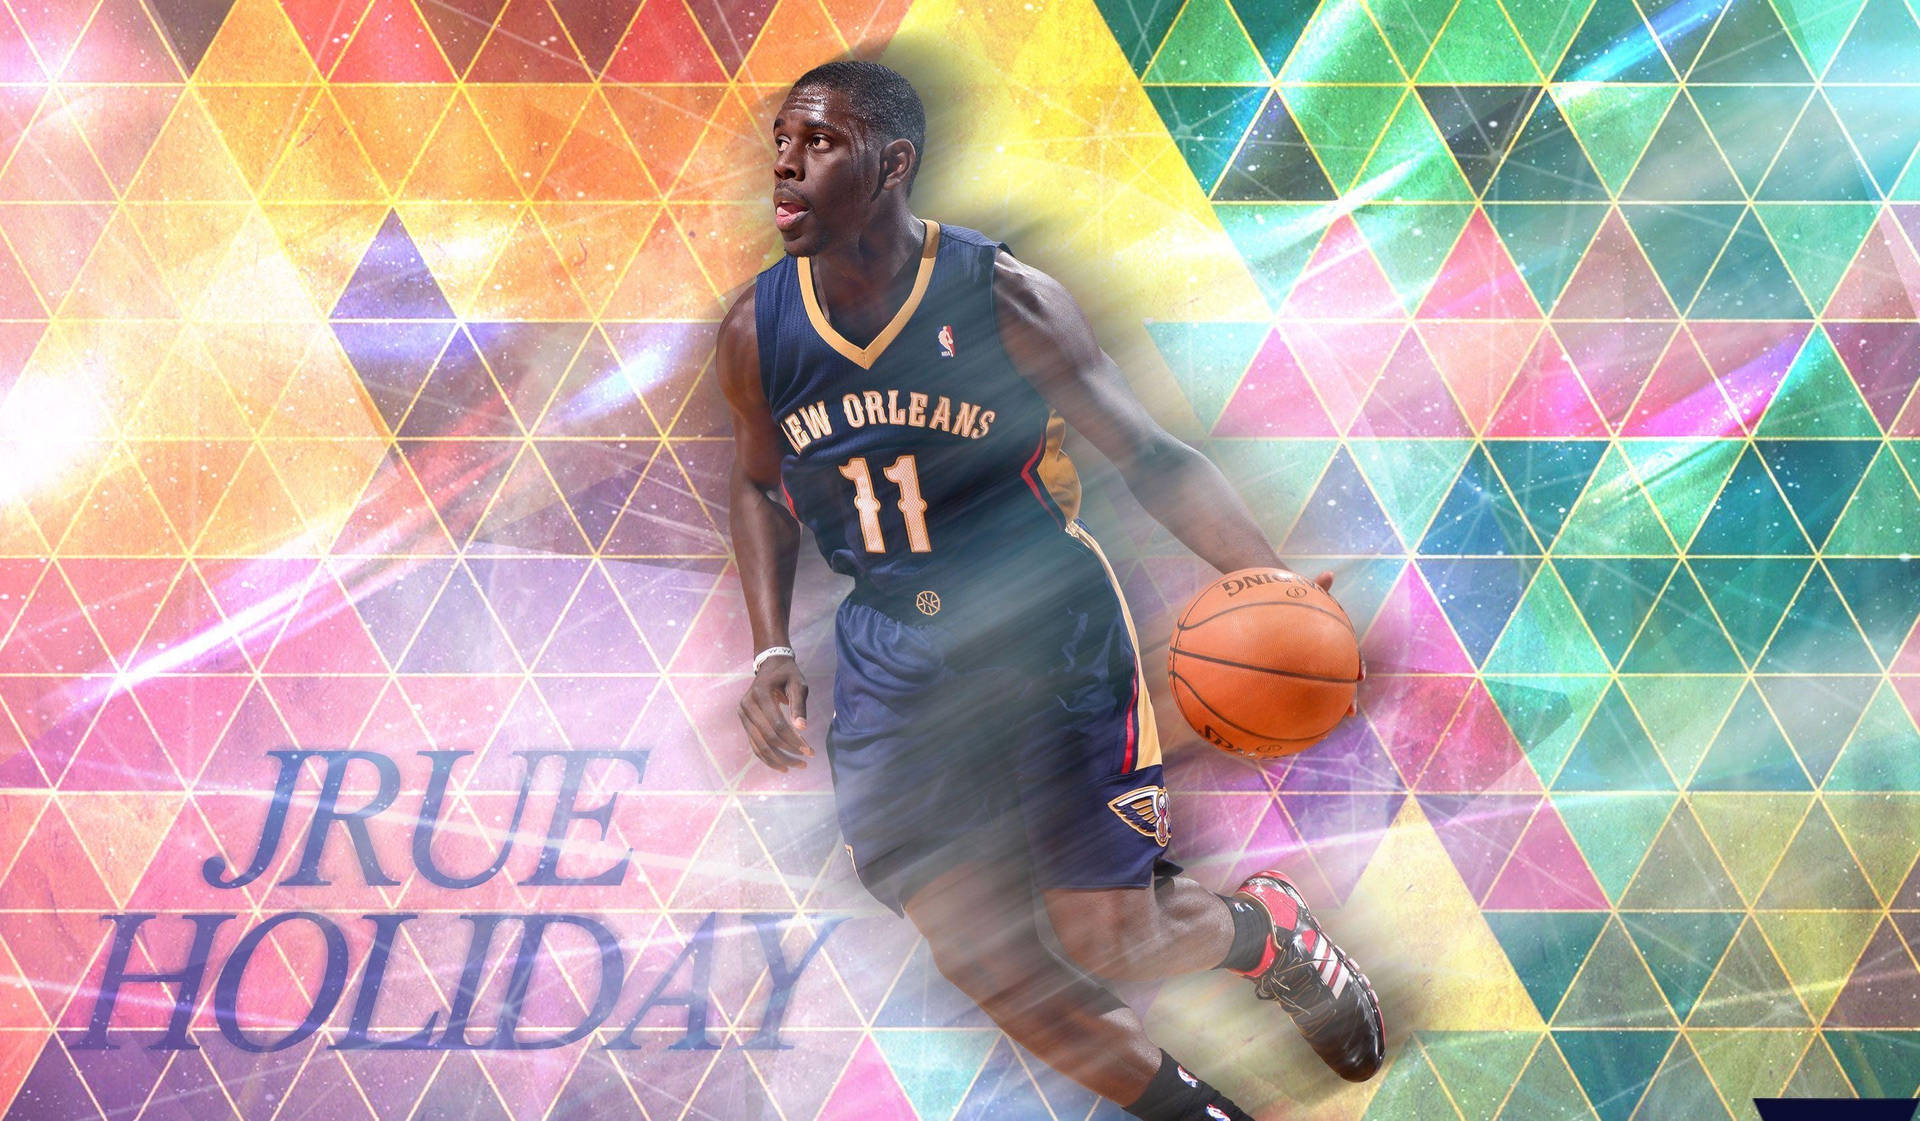 Magnifikstjärna Jrue Holiday. (note: This Sentence Could Potentially Work For Computer Or Mobile Wallpaper If The Image Features Jrue Holiday And Stars.) Wallpaper